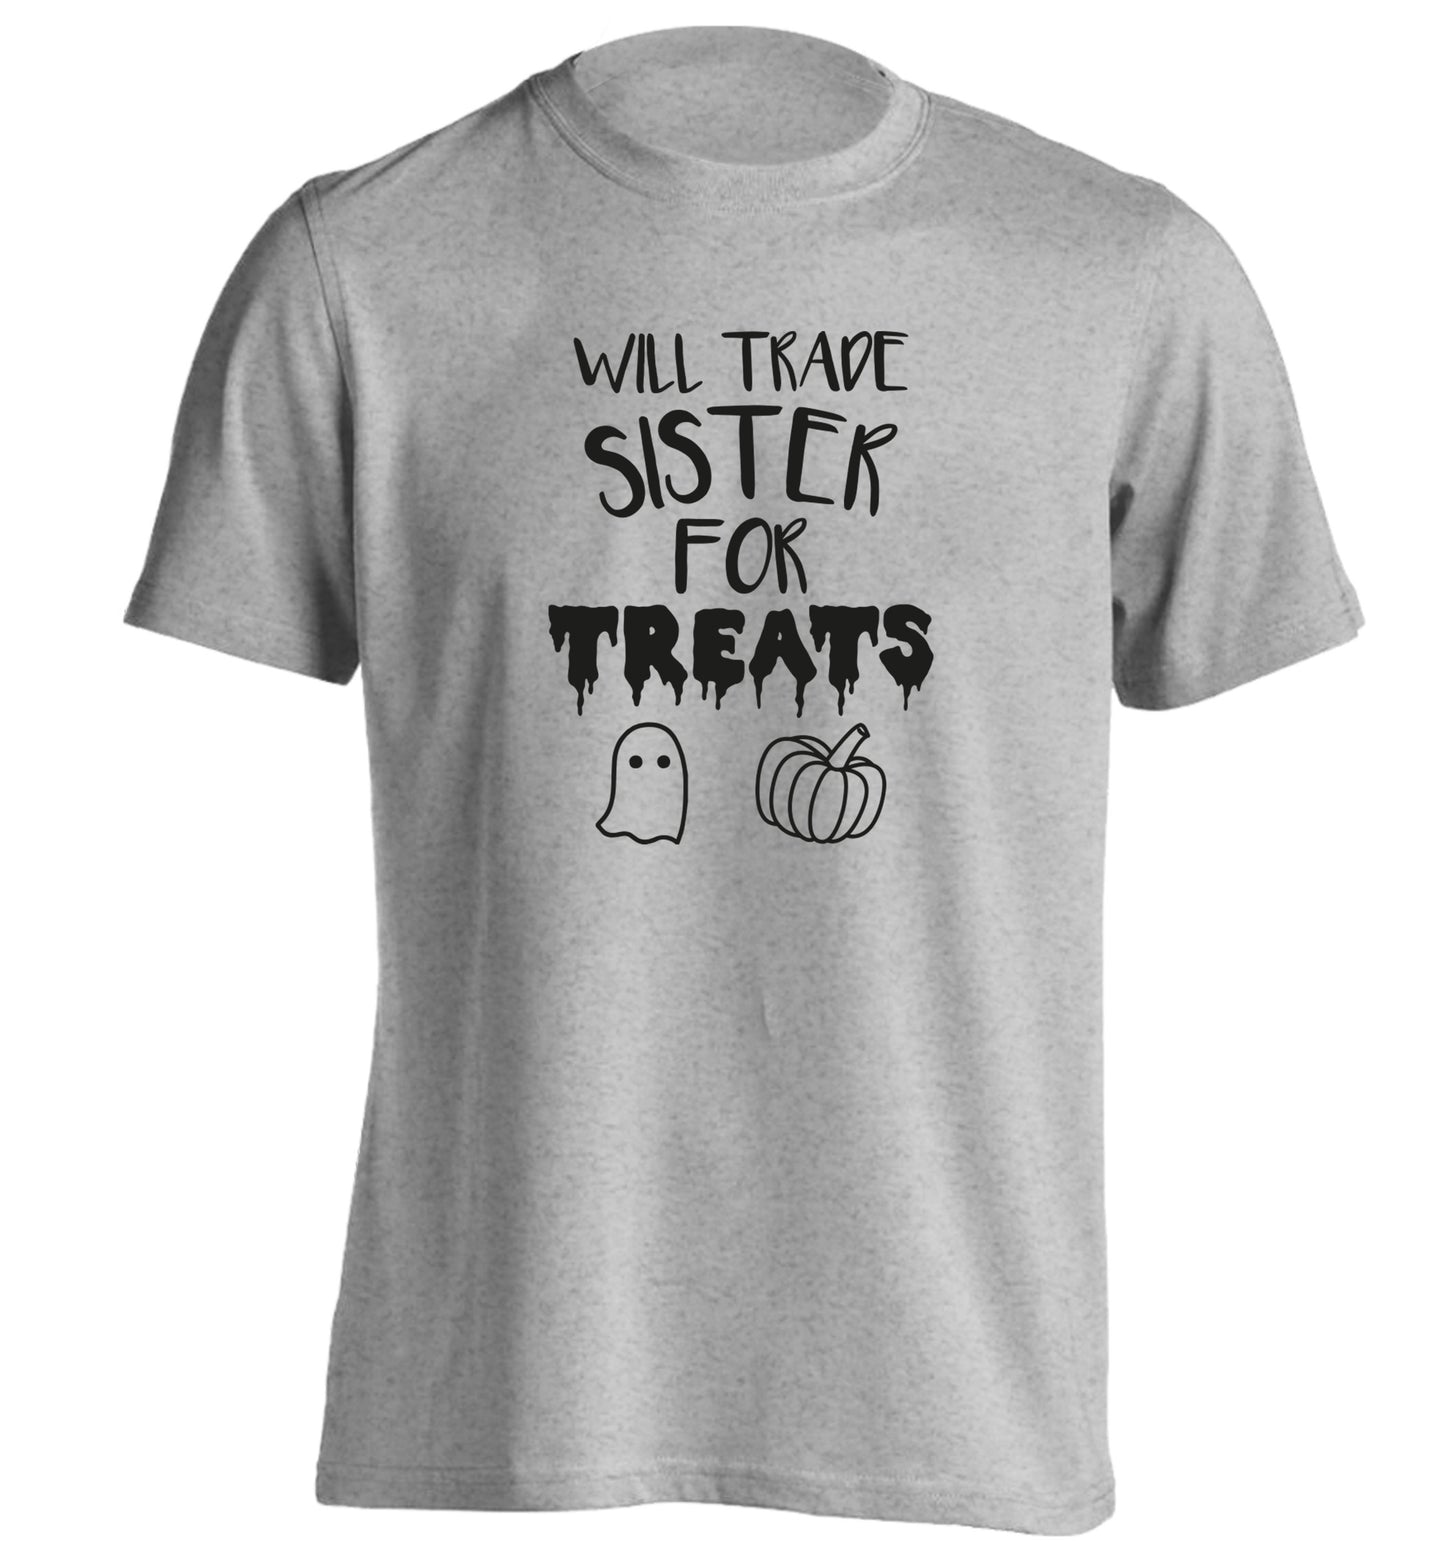 Will trade sister for treats adults unisex grey Tshirt 2XL